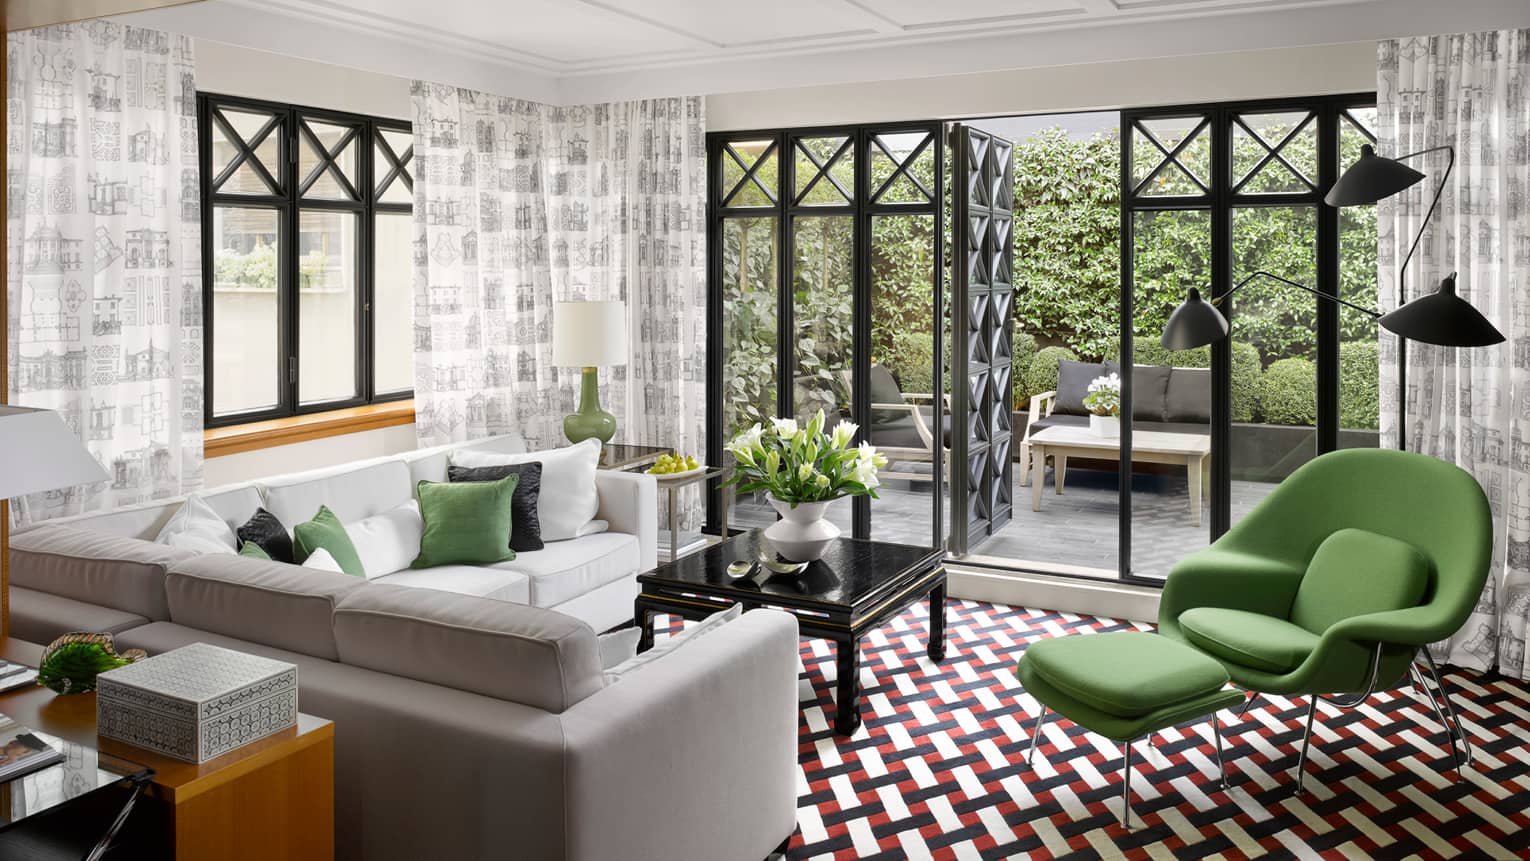 Fashion Suite grey, white sofas, green armchair on retro-style red-and-black tile floor, open balcony doors